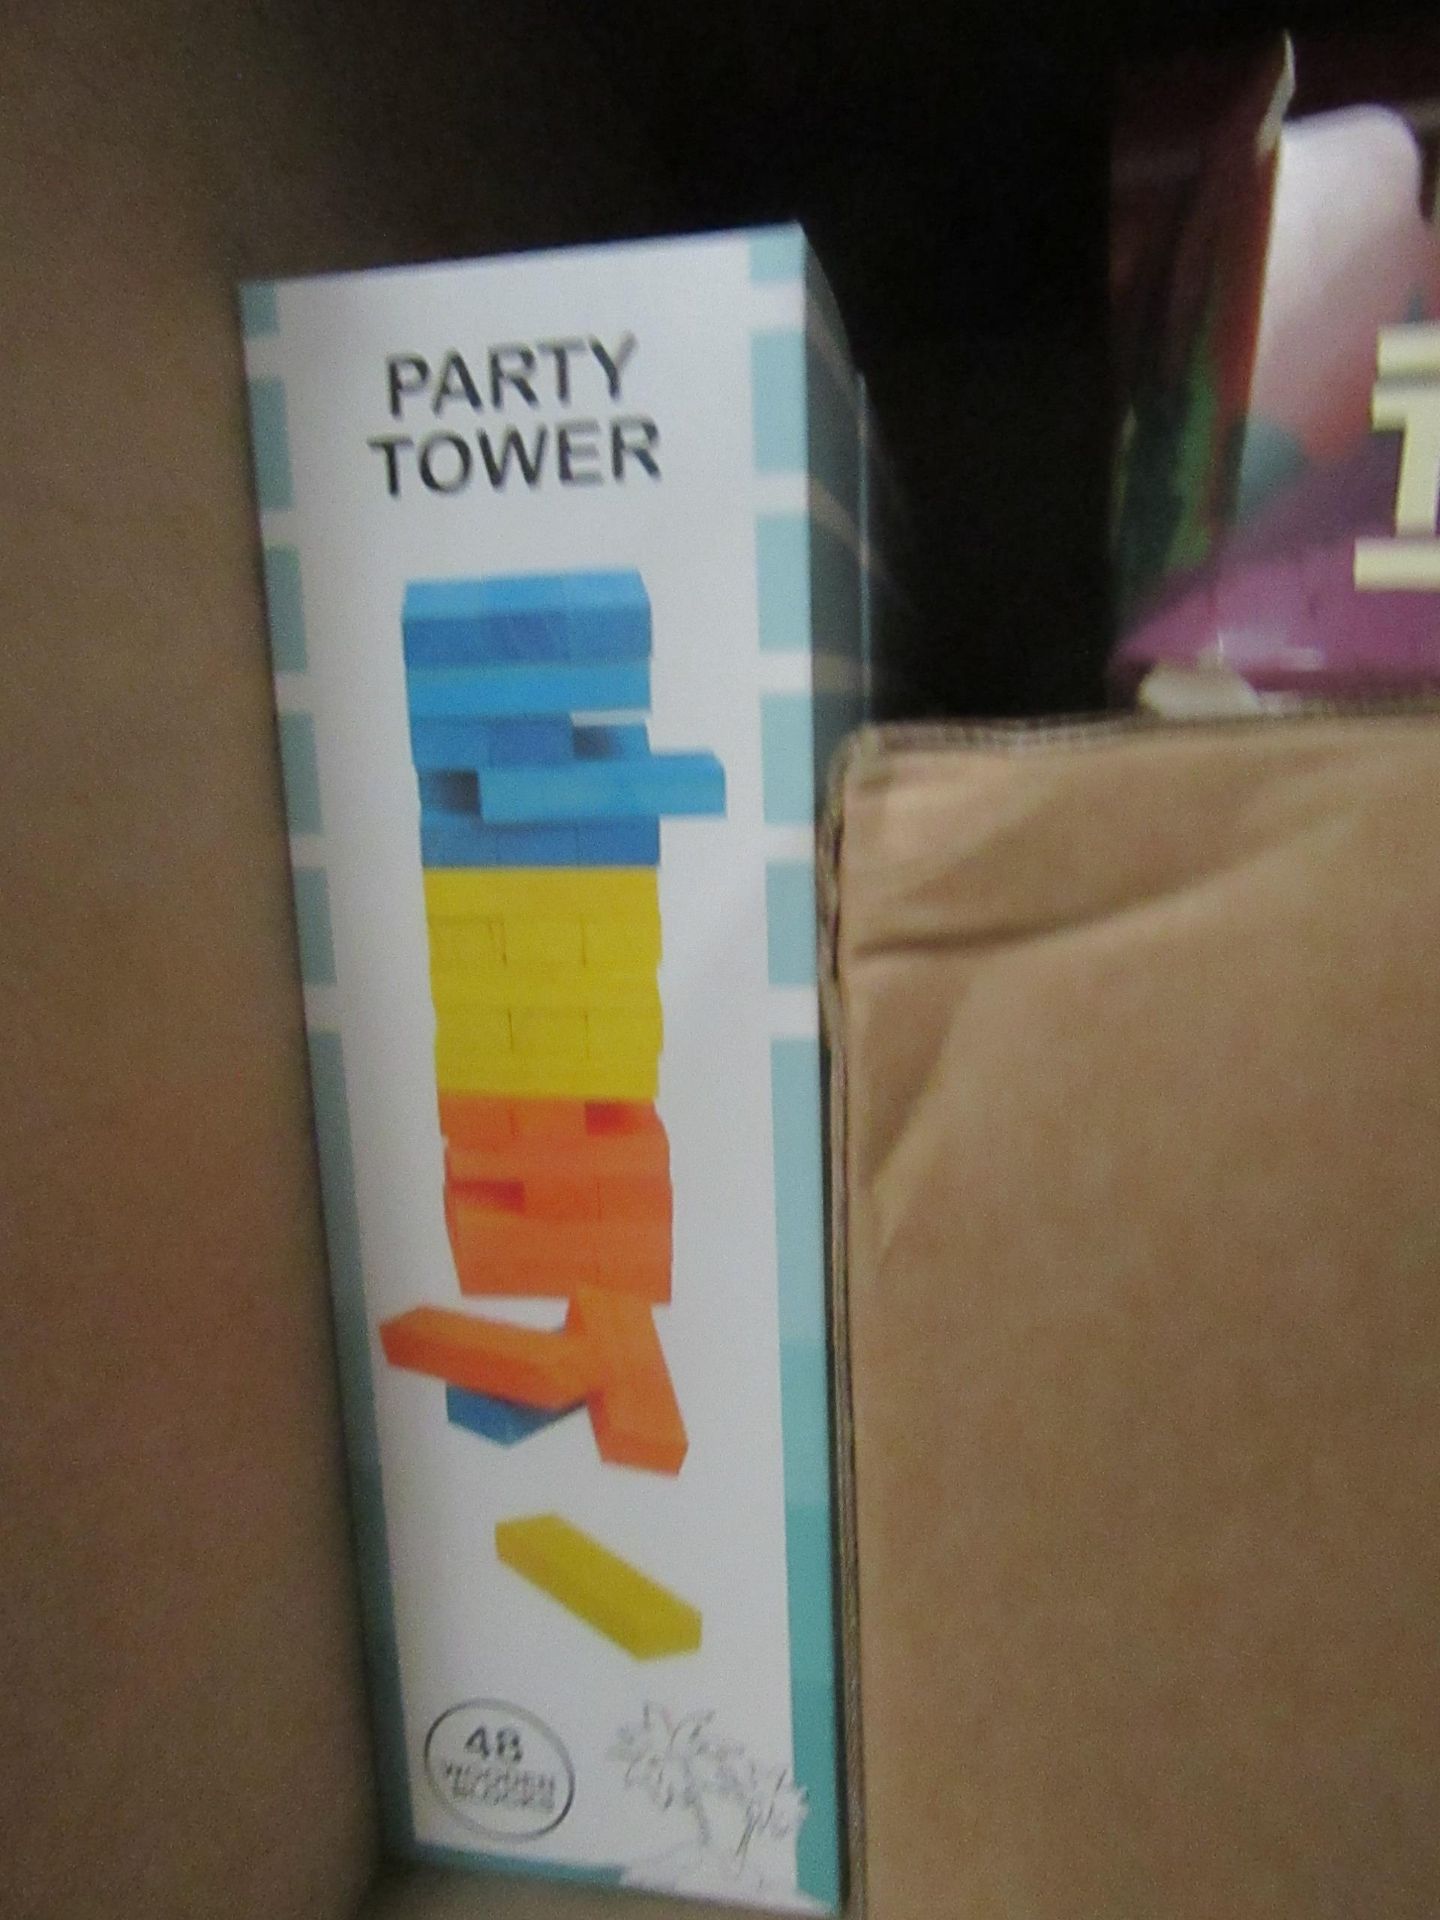 Party tower, 48 wooden blocks, New & Boxed